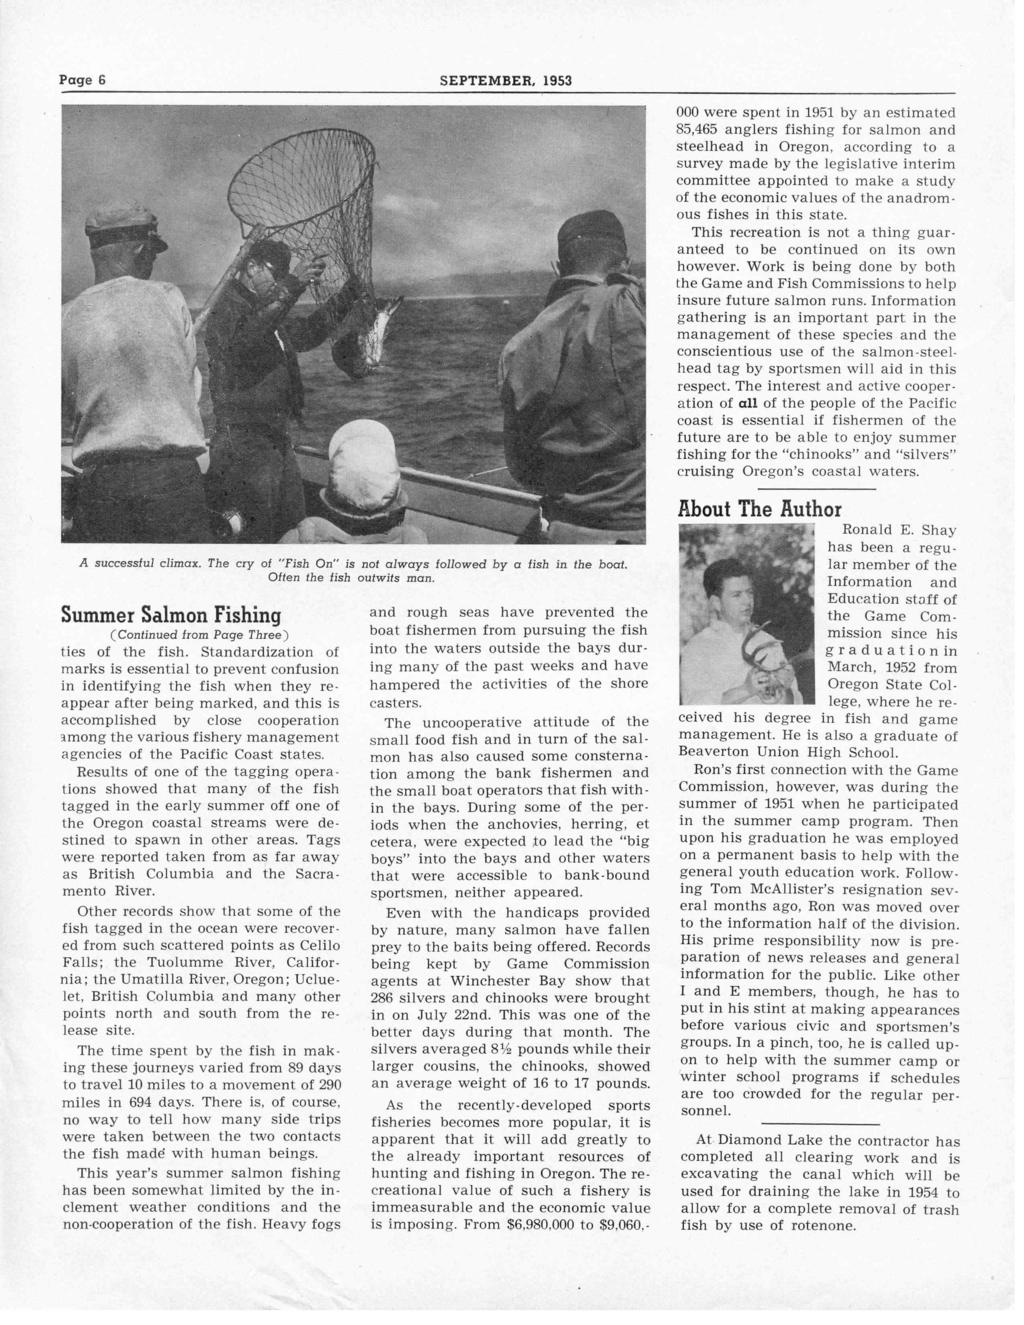 Page 6 SEPTEMBER, 1953 000 were spent in 1951 by an estimated 85,465 anglers fishing for salmon and steelhead in Oregon, according to a survey made by the legislative interim committee appointed to